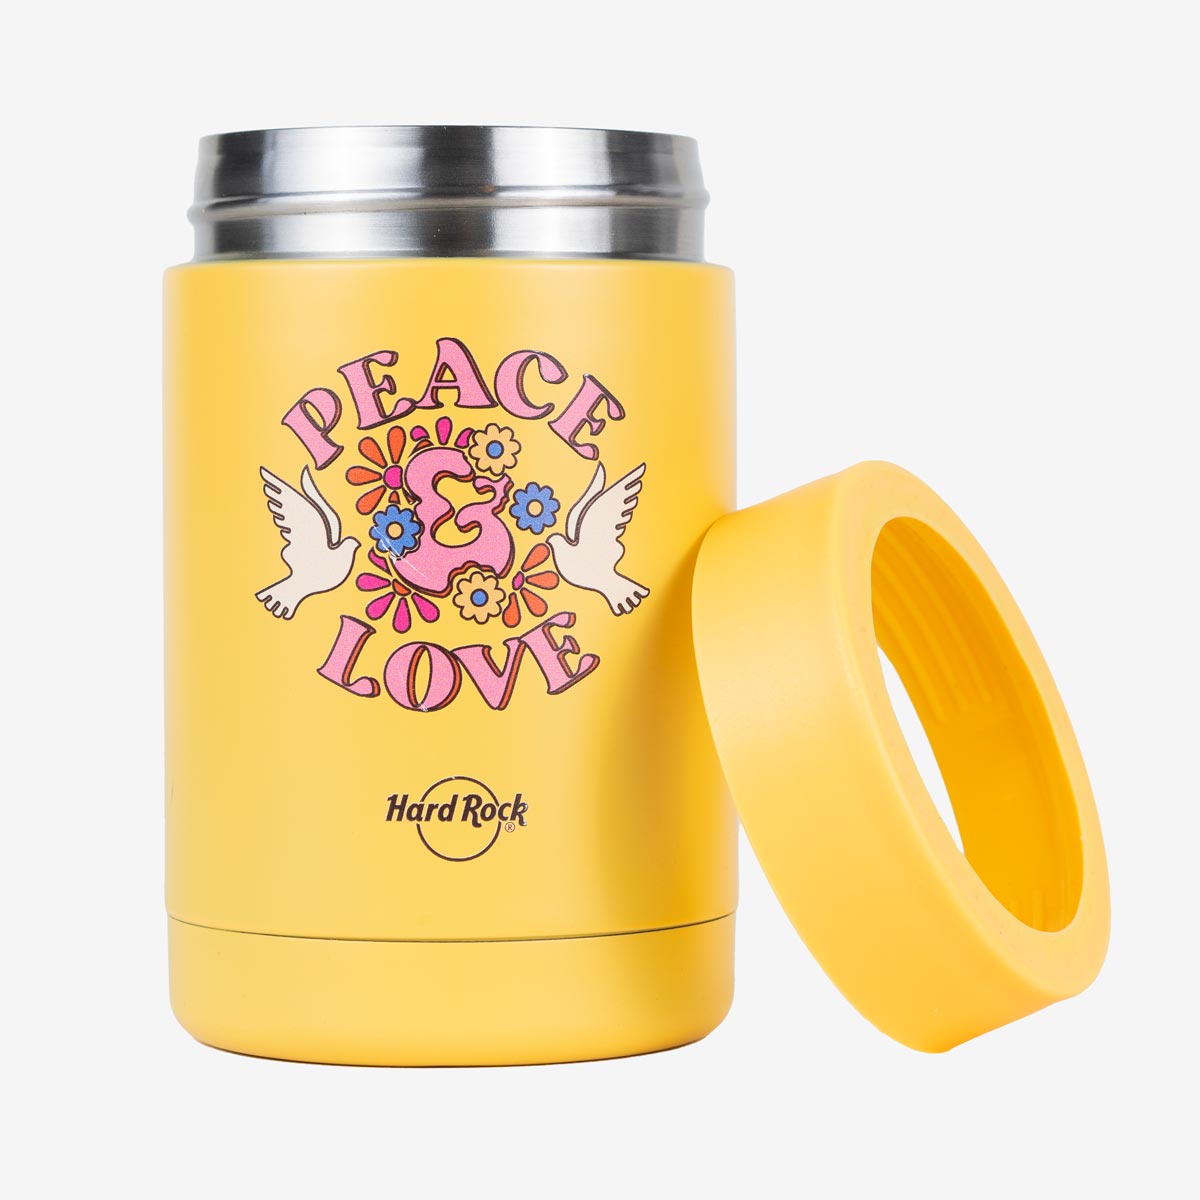 Hard Rock Festival Peace and Love Koozie in Yellow image number 2